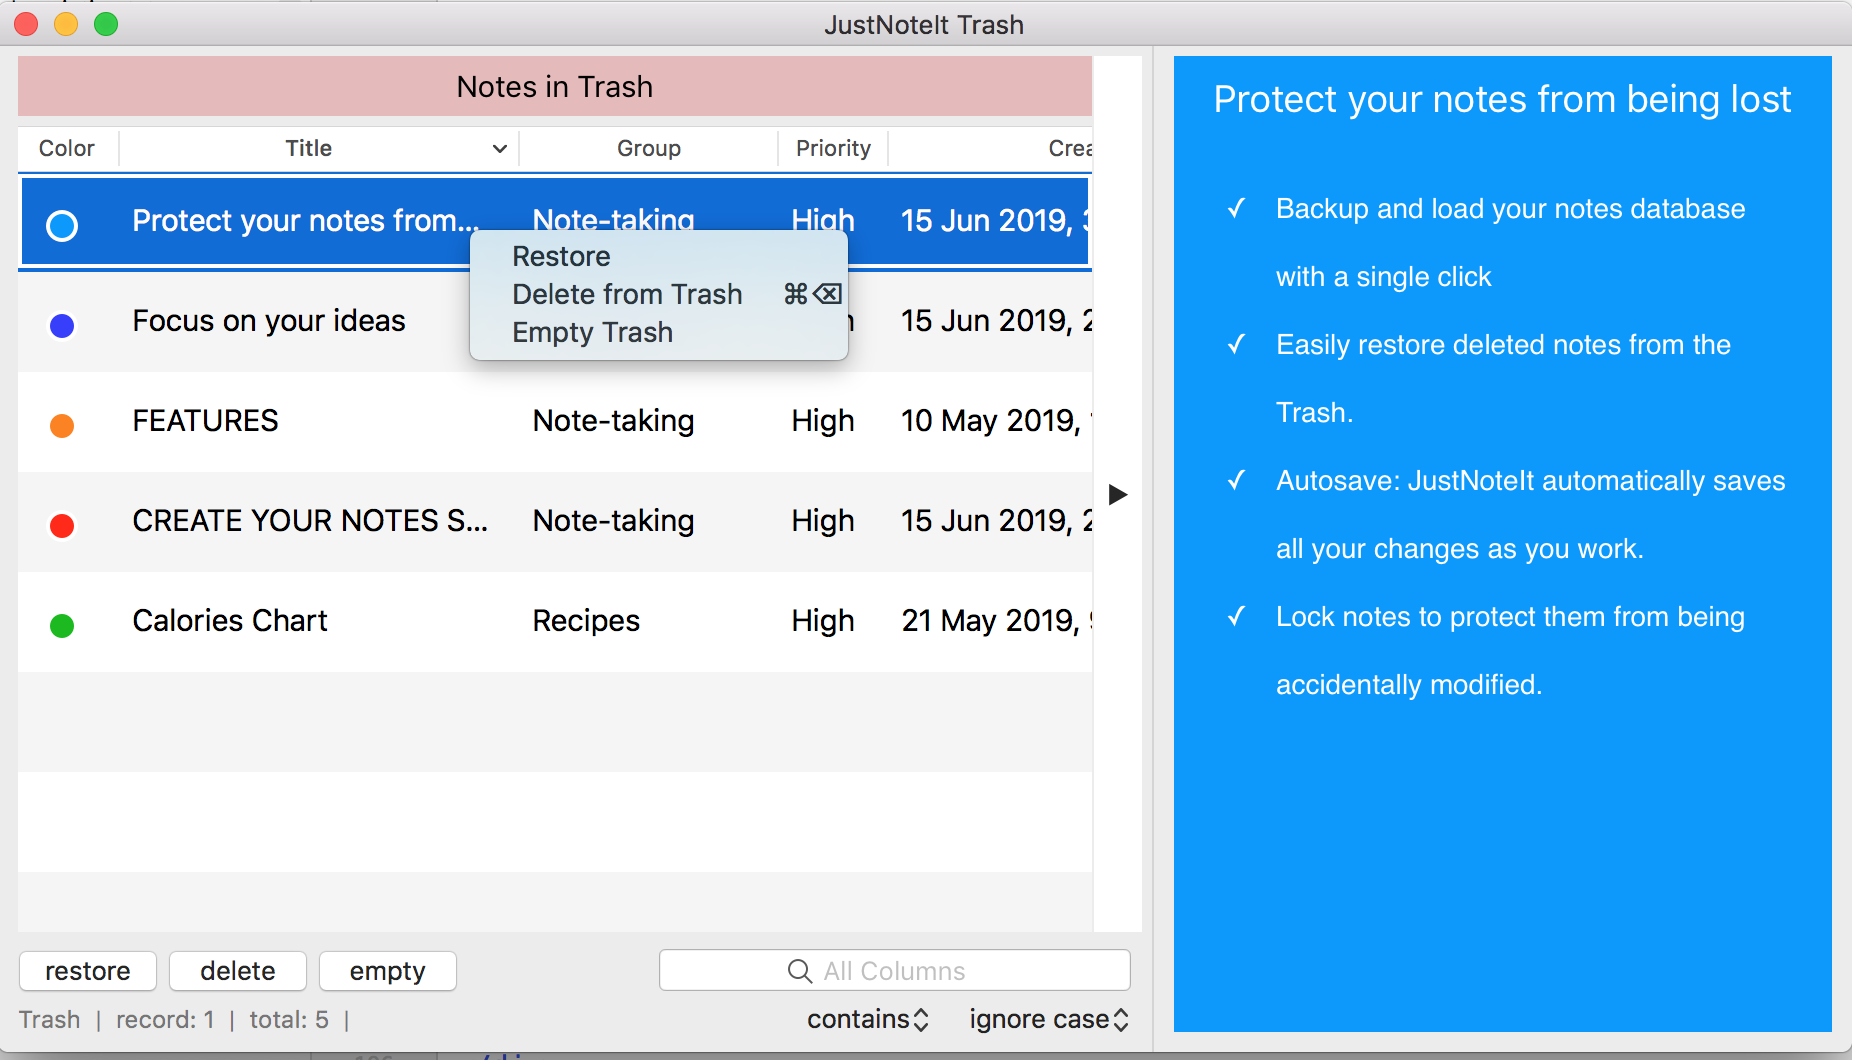 Restore deleted notes from the Trash